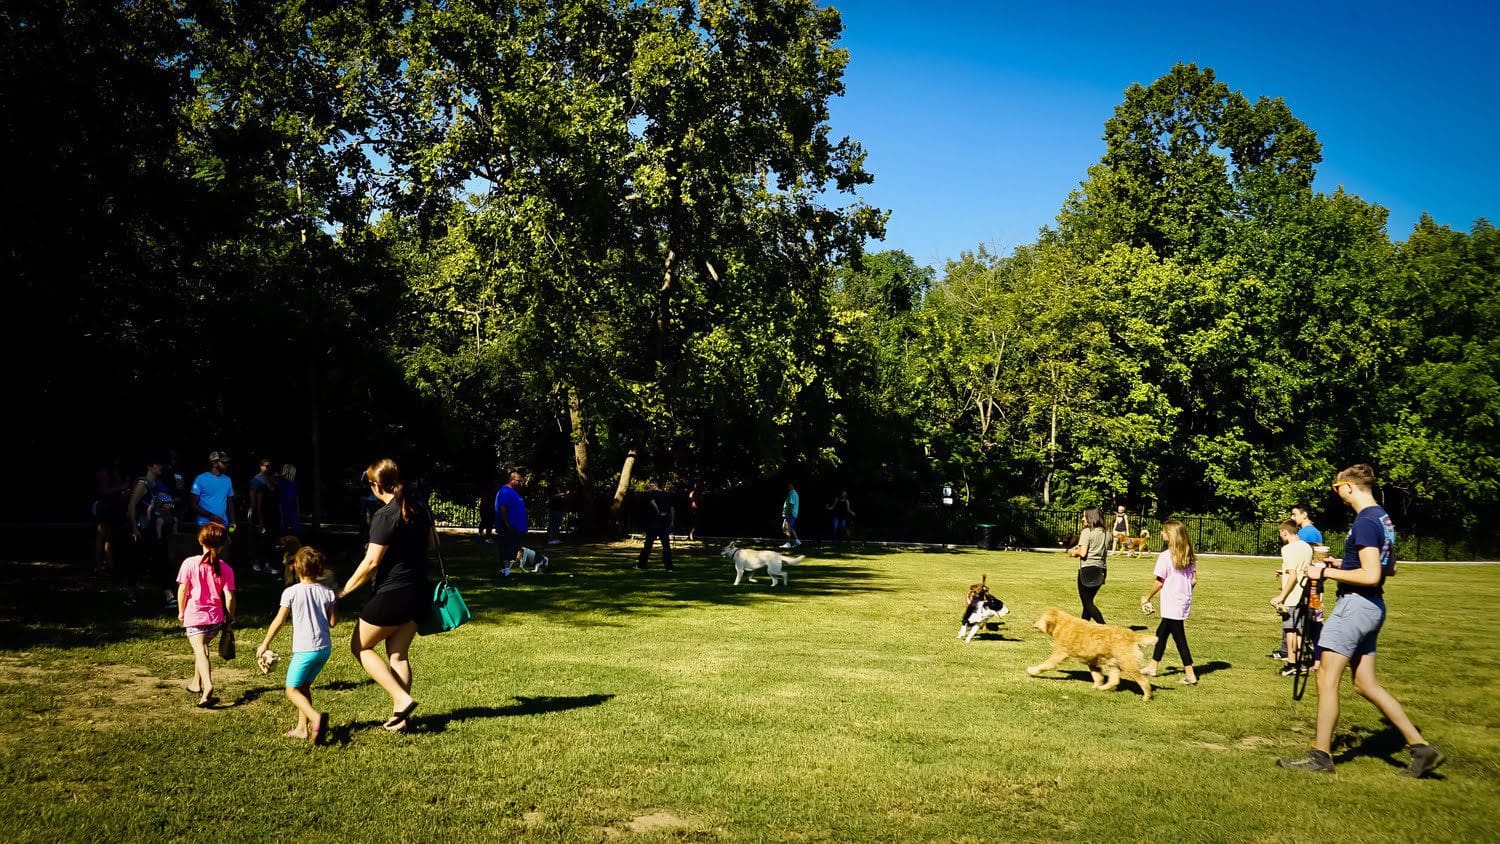 A group of people playing frisbee in the park.